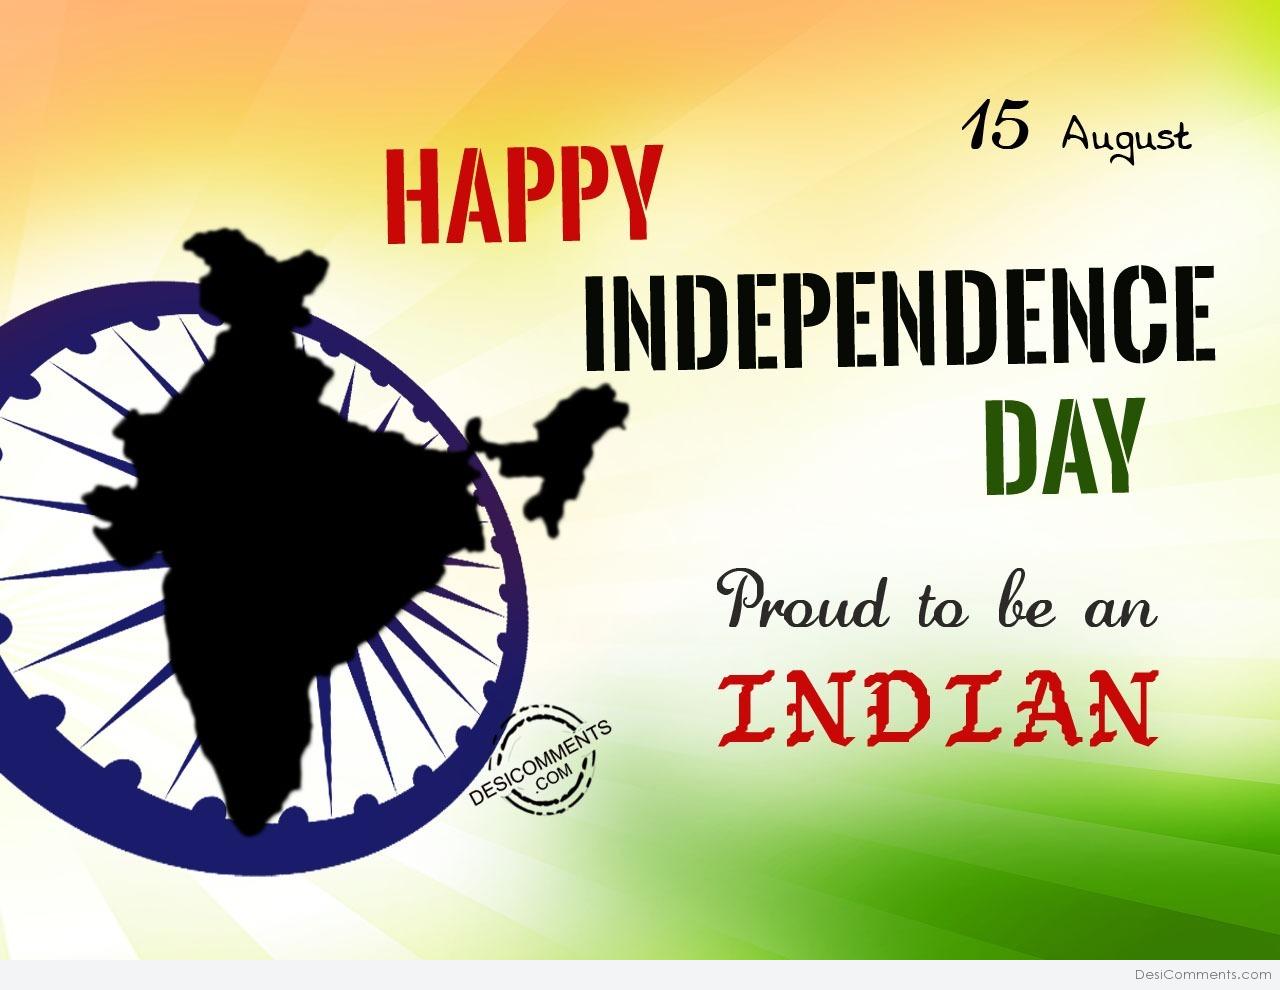 Proud to be an Indian,Happy Independence Day - DesiComments.com